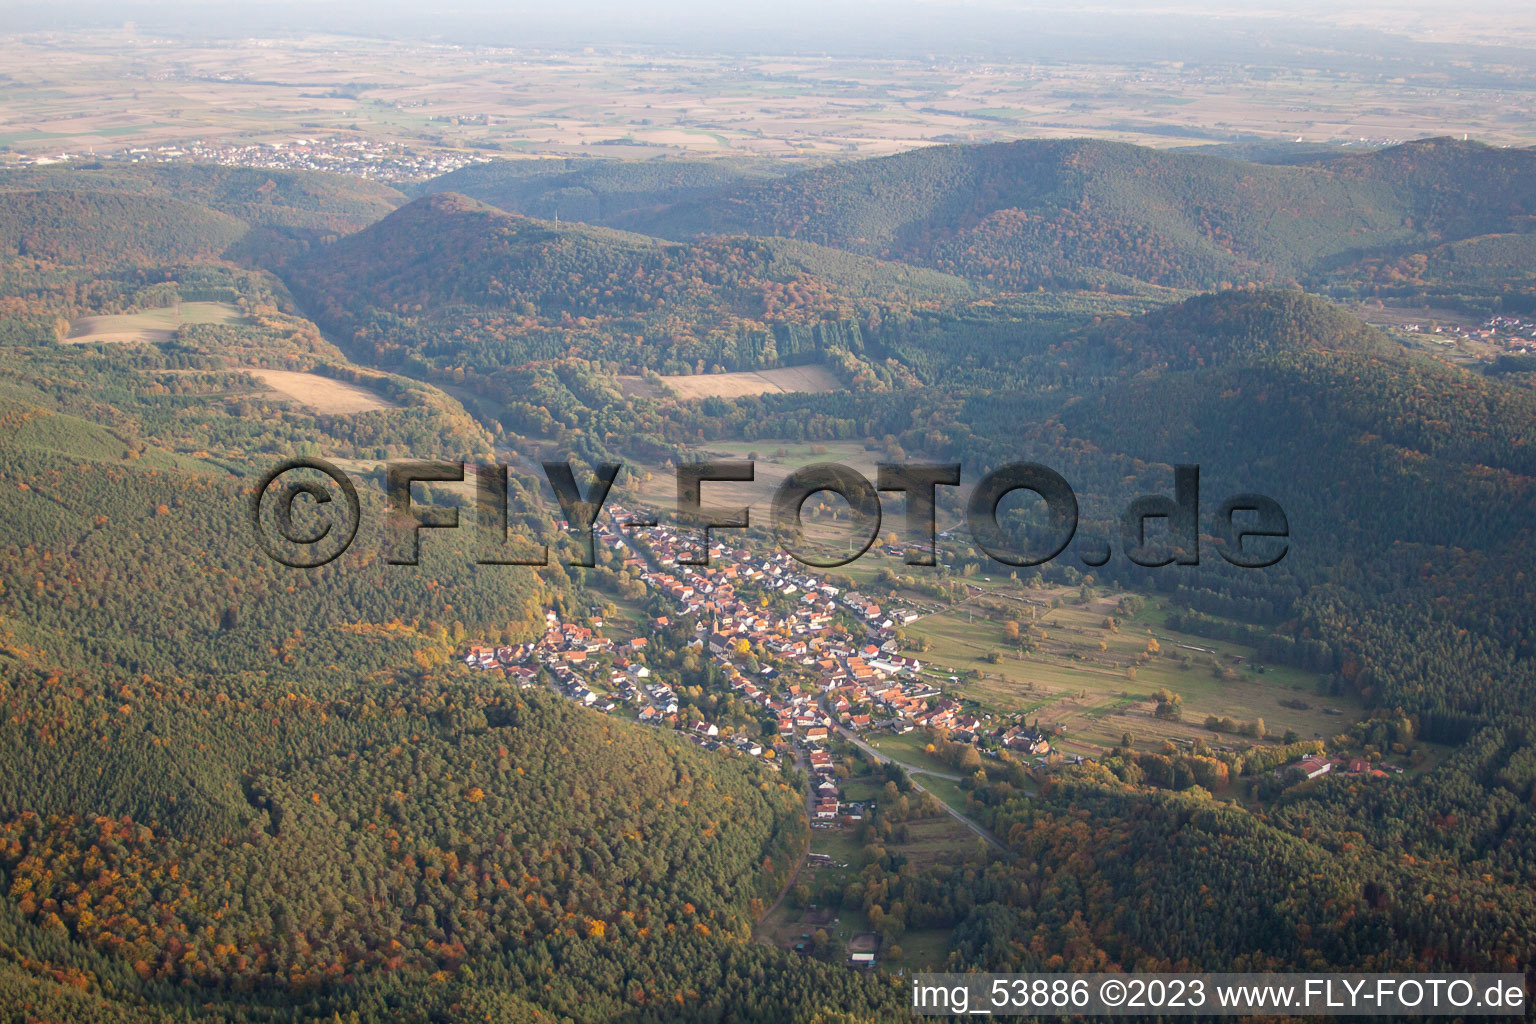 Oblique view of Birkenhördt in the state Rhineland-Palatinate, Germany